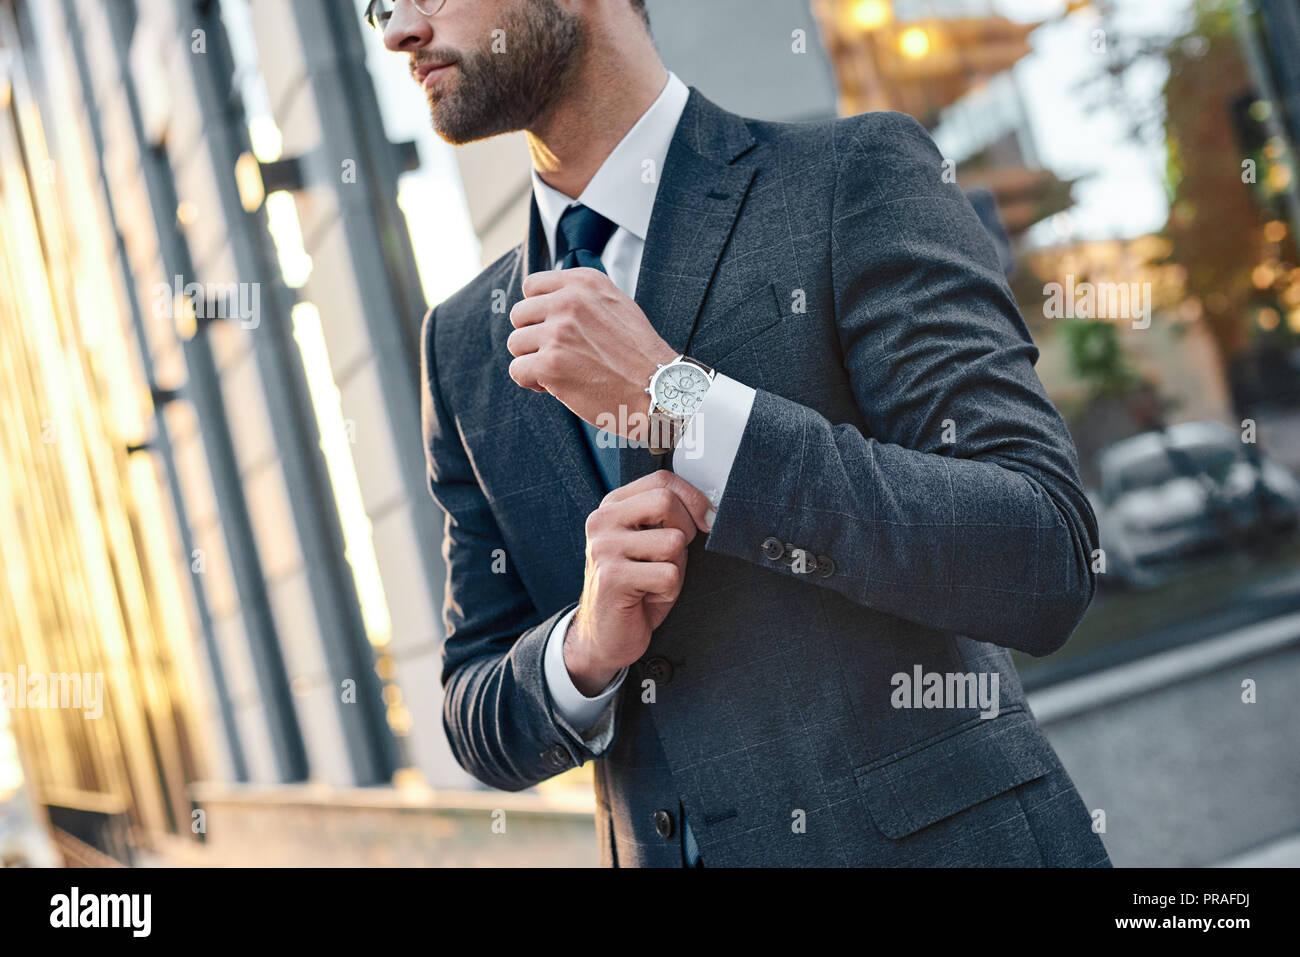 Cropped profile portrait of a successful young bearded guy in suit and glasses. So stylish and nerdy. Outdoors on a sunny street, fixing his cuffs Stock Photo